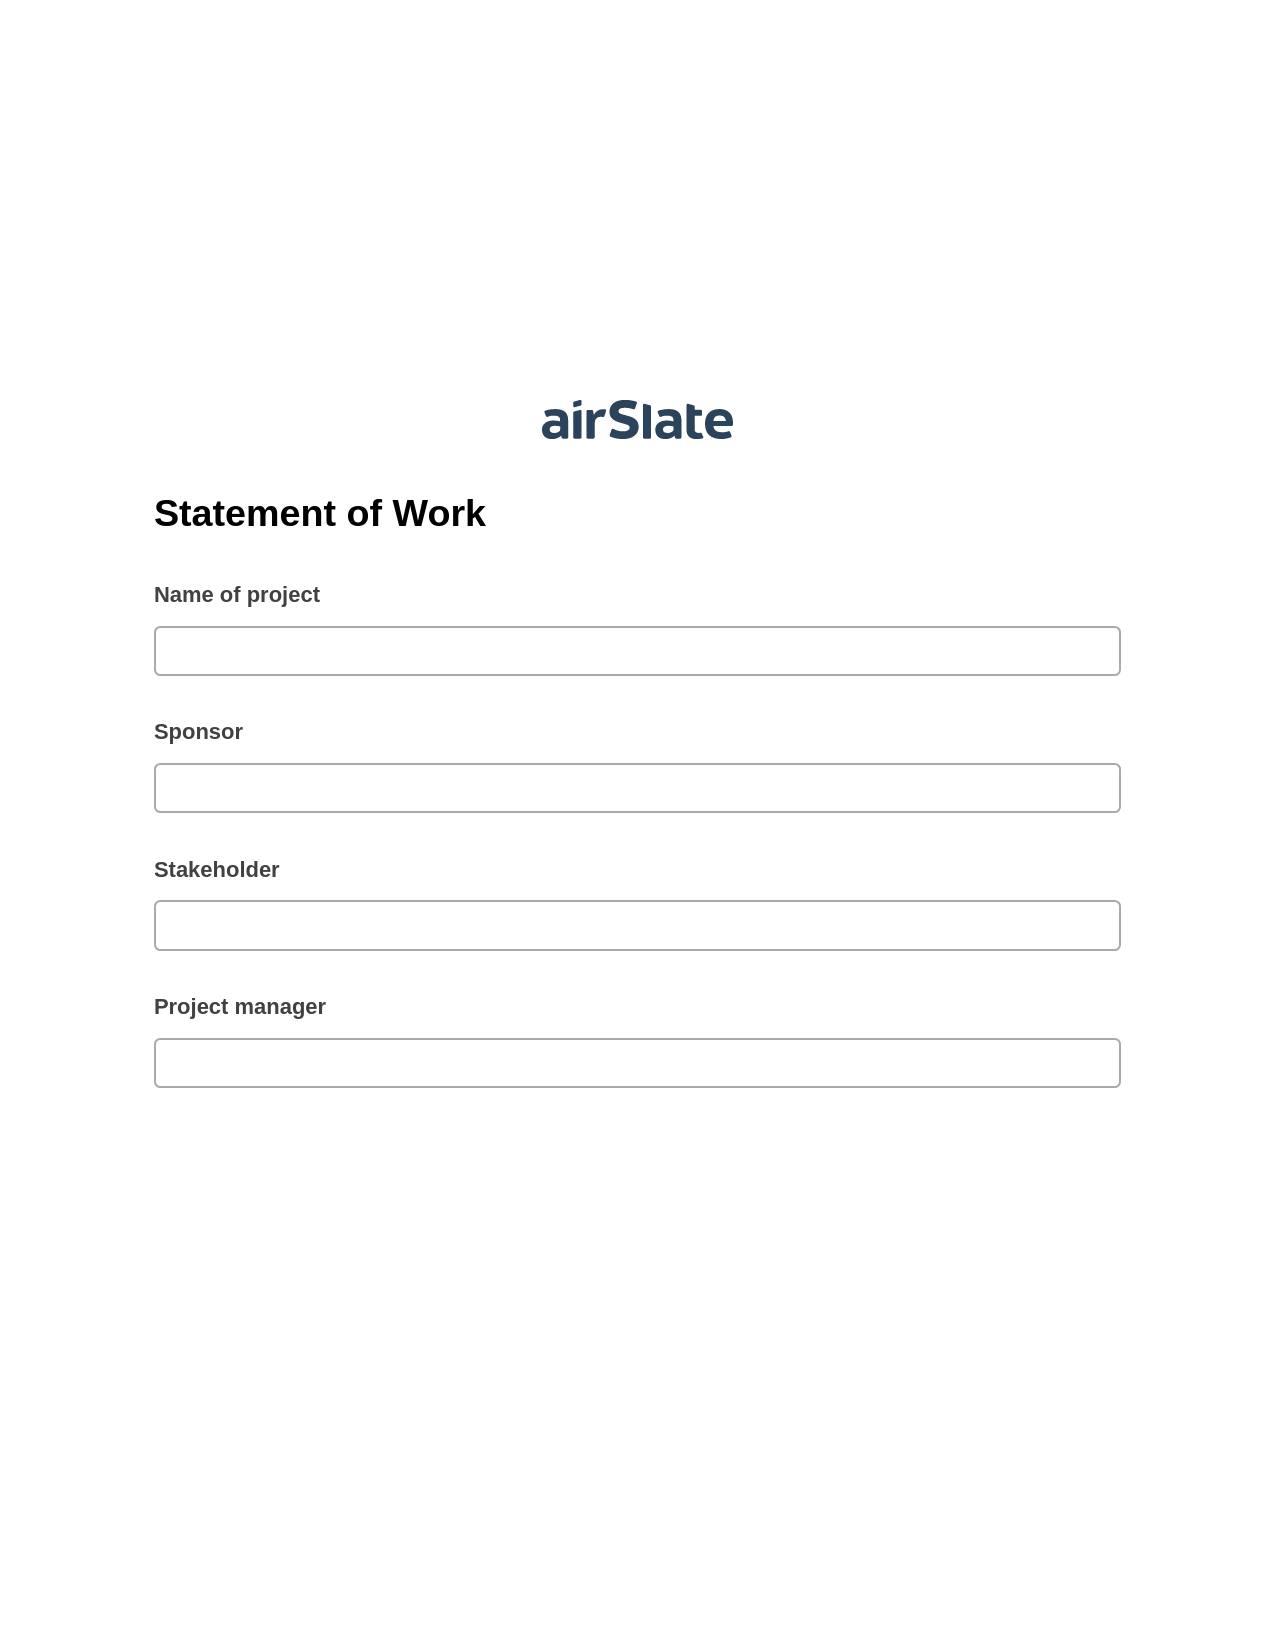 Statement of Work Pre-fill from CSV File Dropdown Options Bot, Reminder Bot, Box Bot